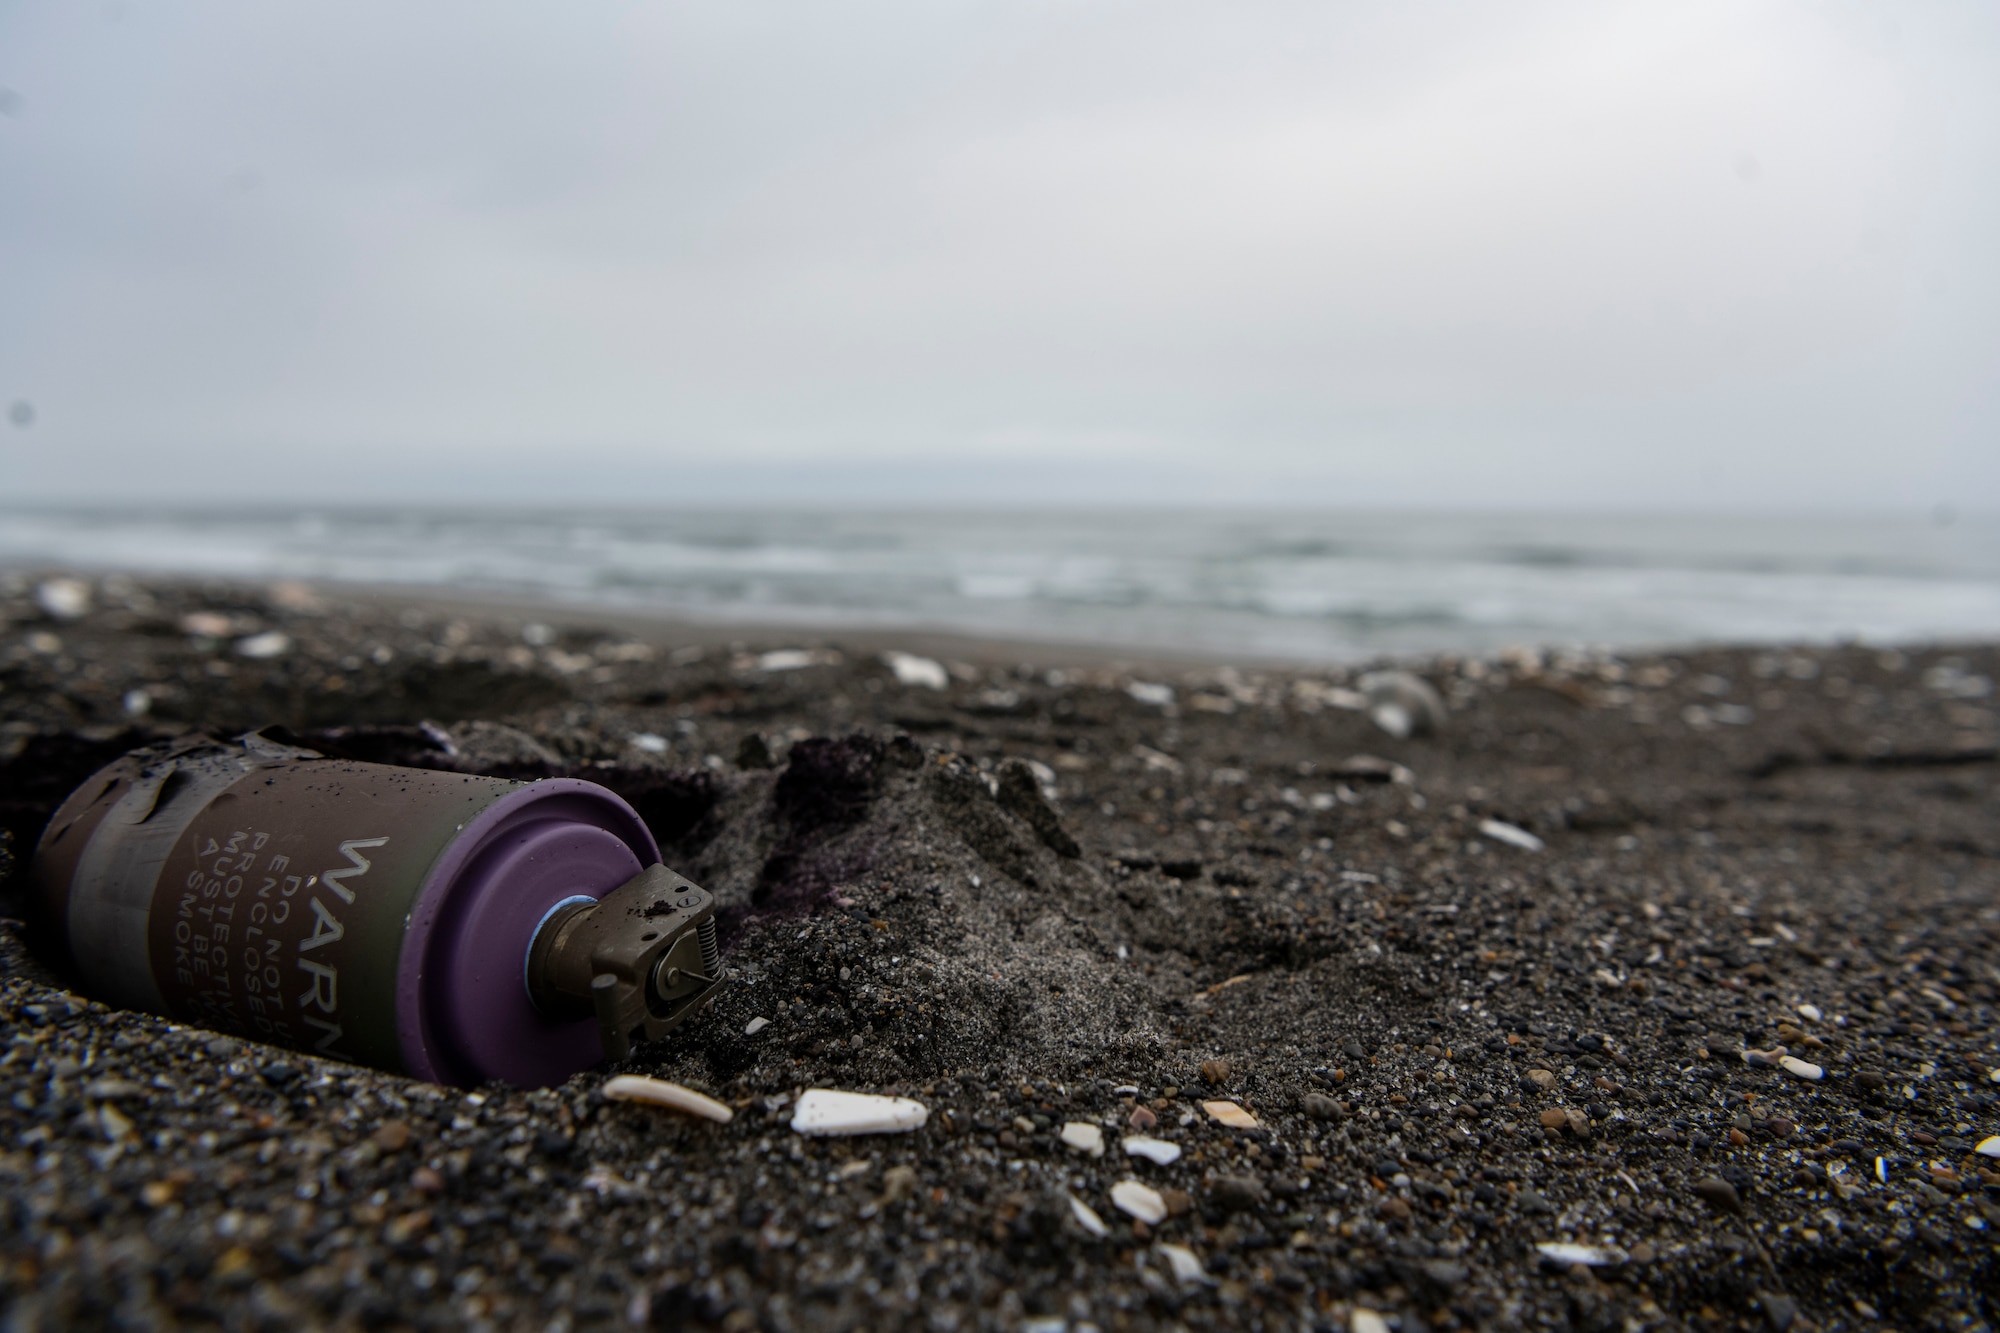 A purple smoke grenade lays in the sand of a beach.